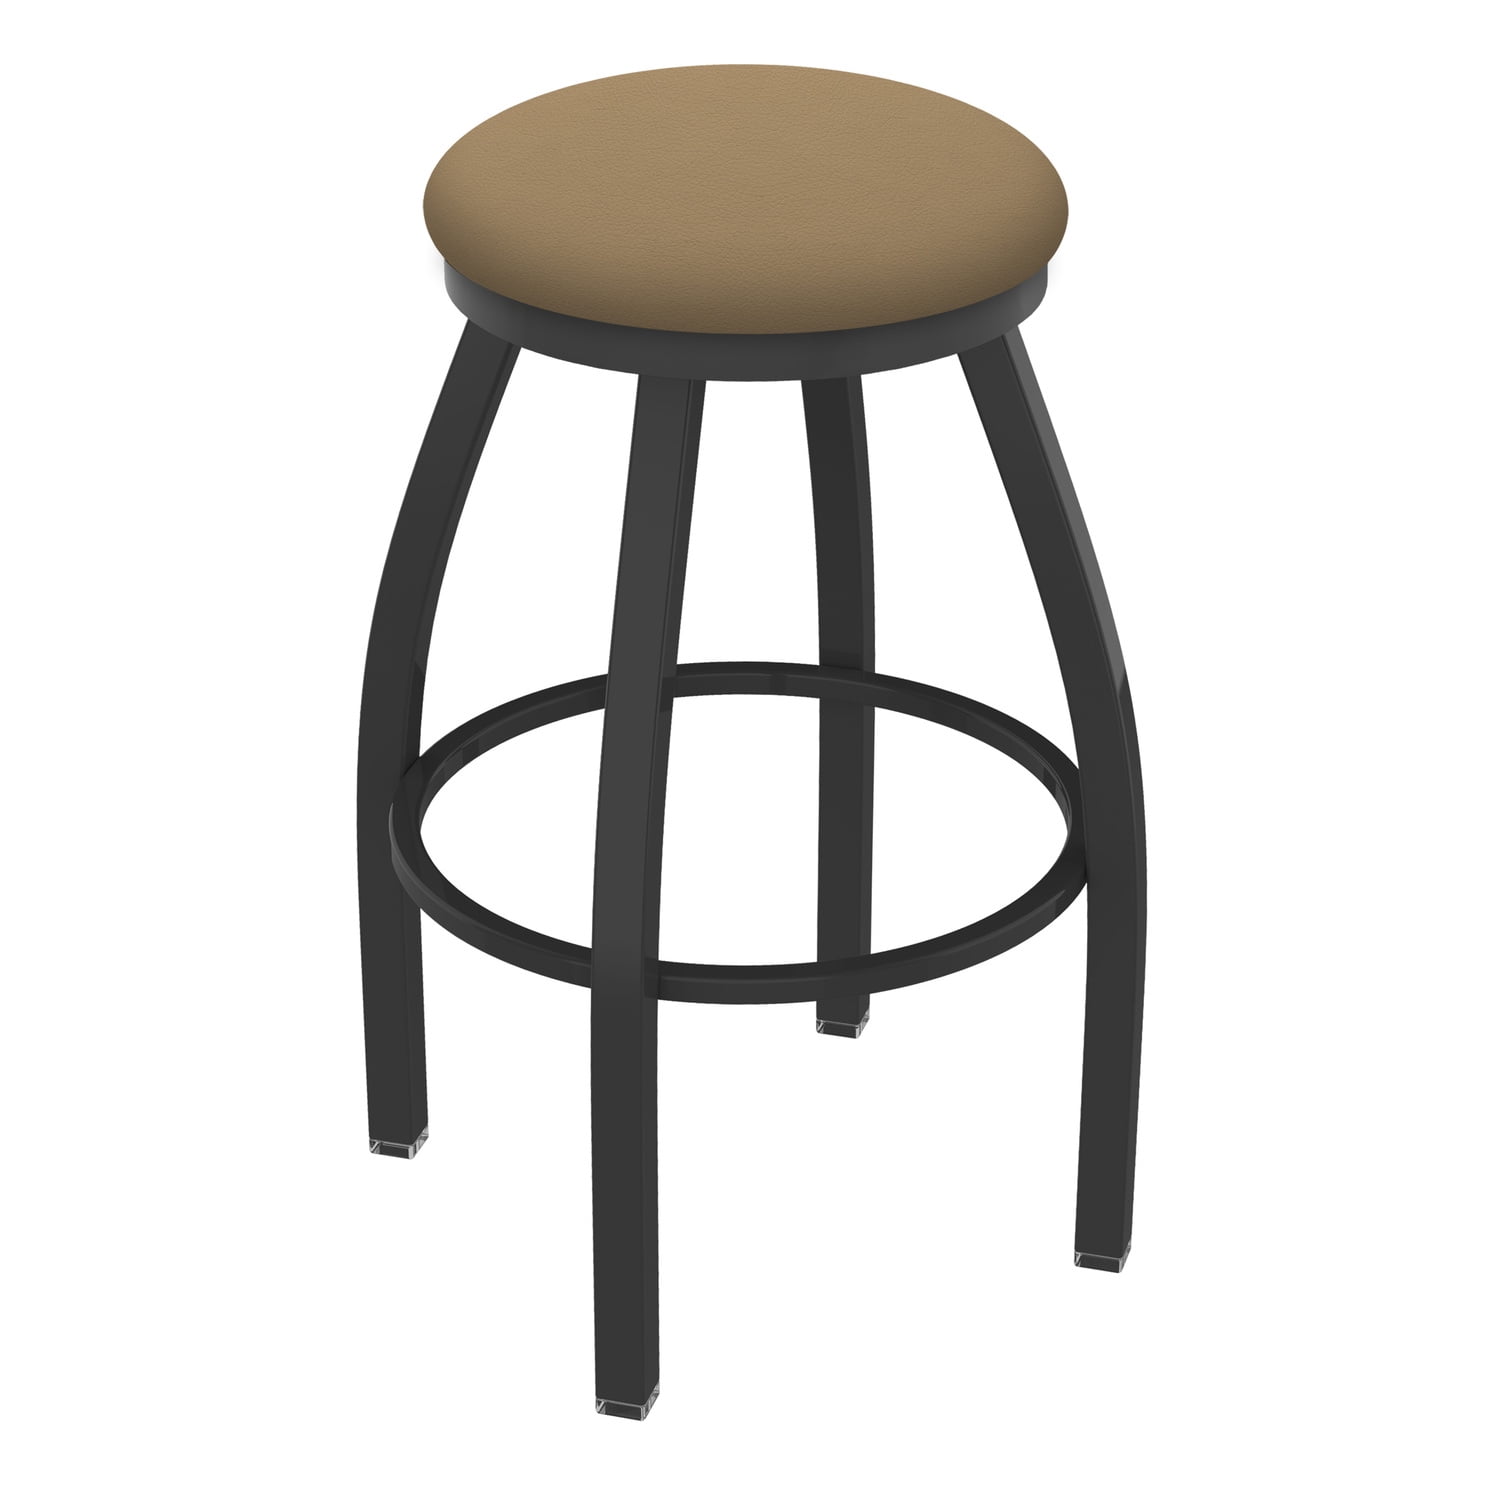 820 Catalina 25" Counter Stool with Pewter Finish Allante  Seat and 360 swivel 